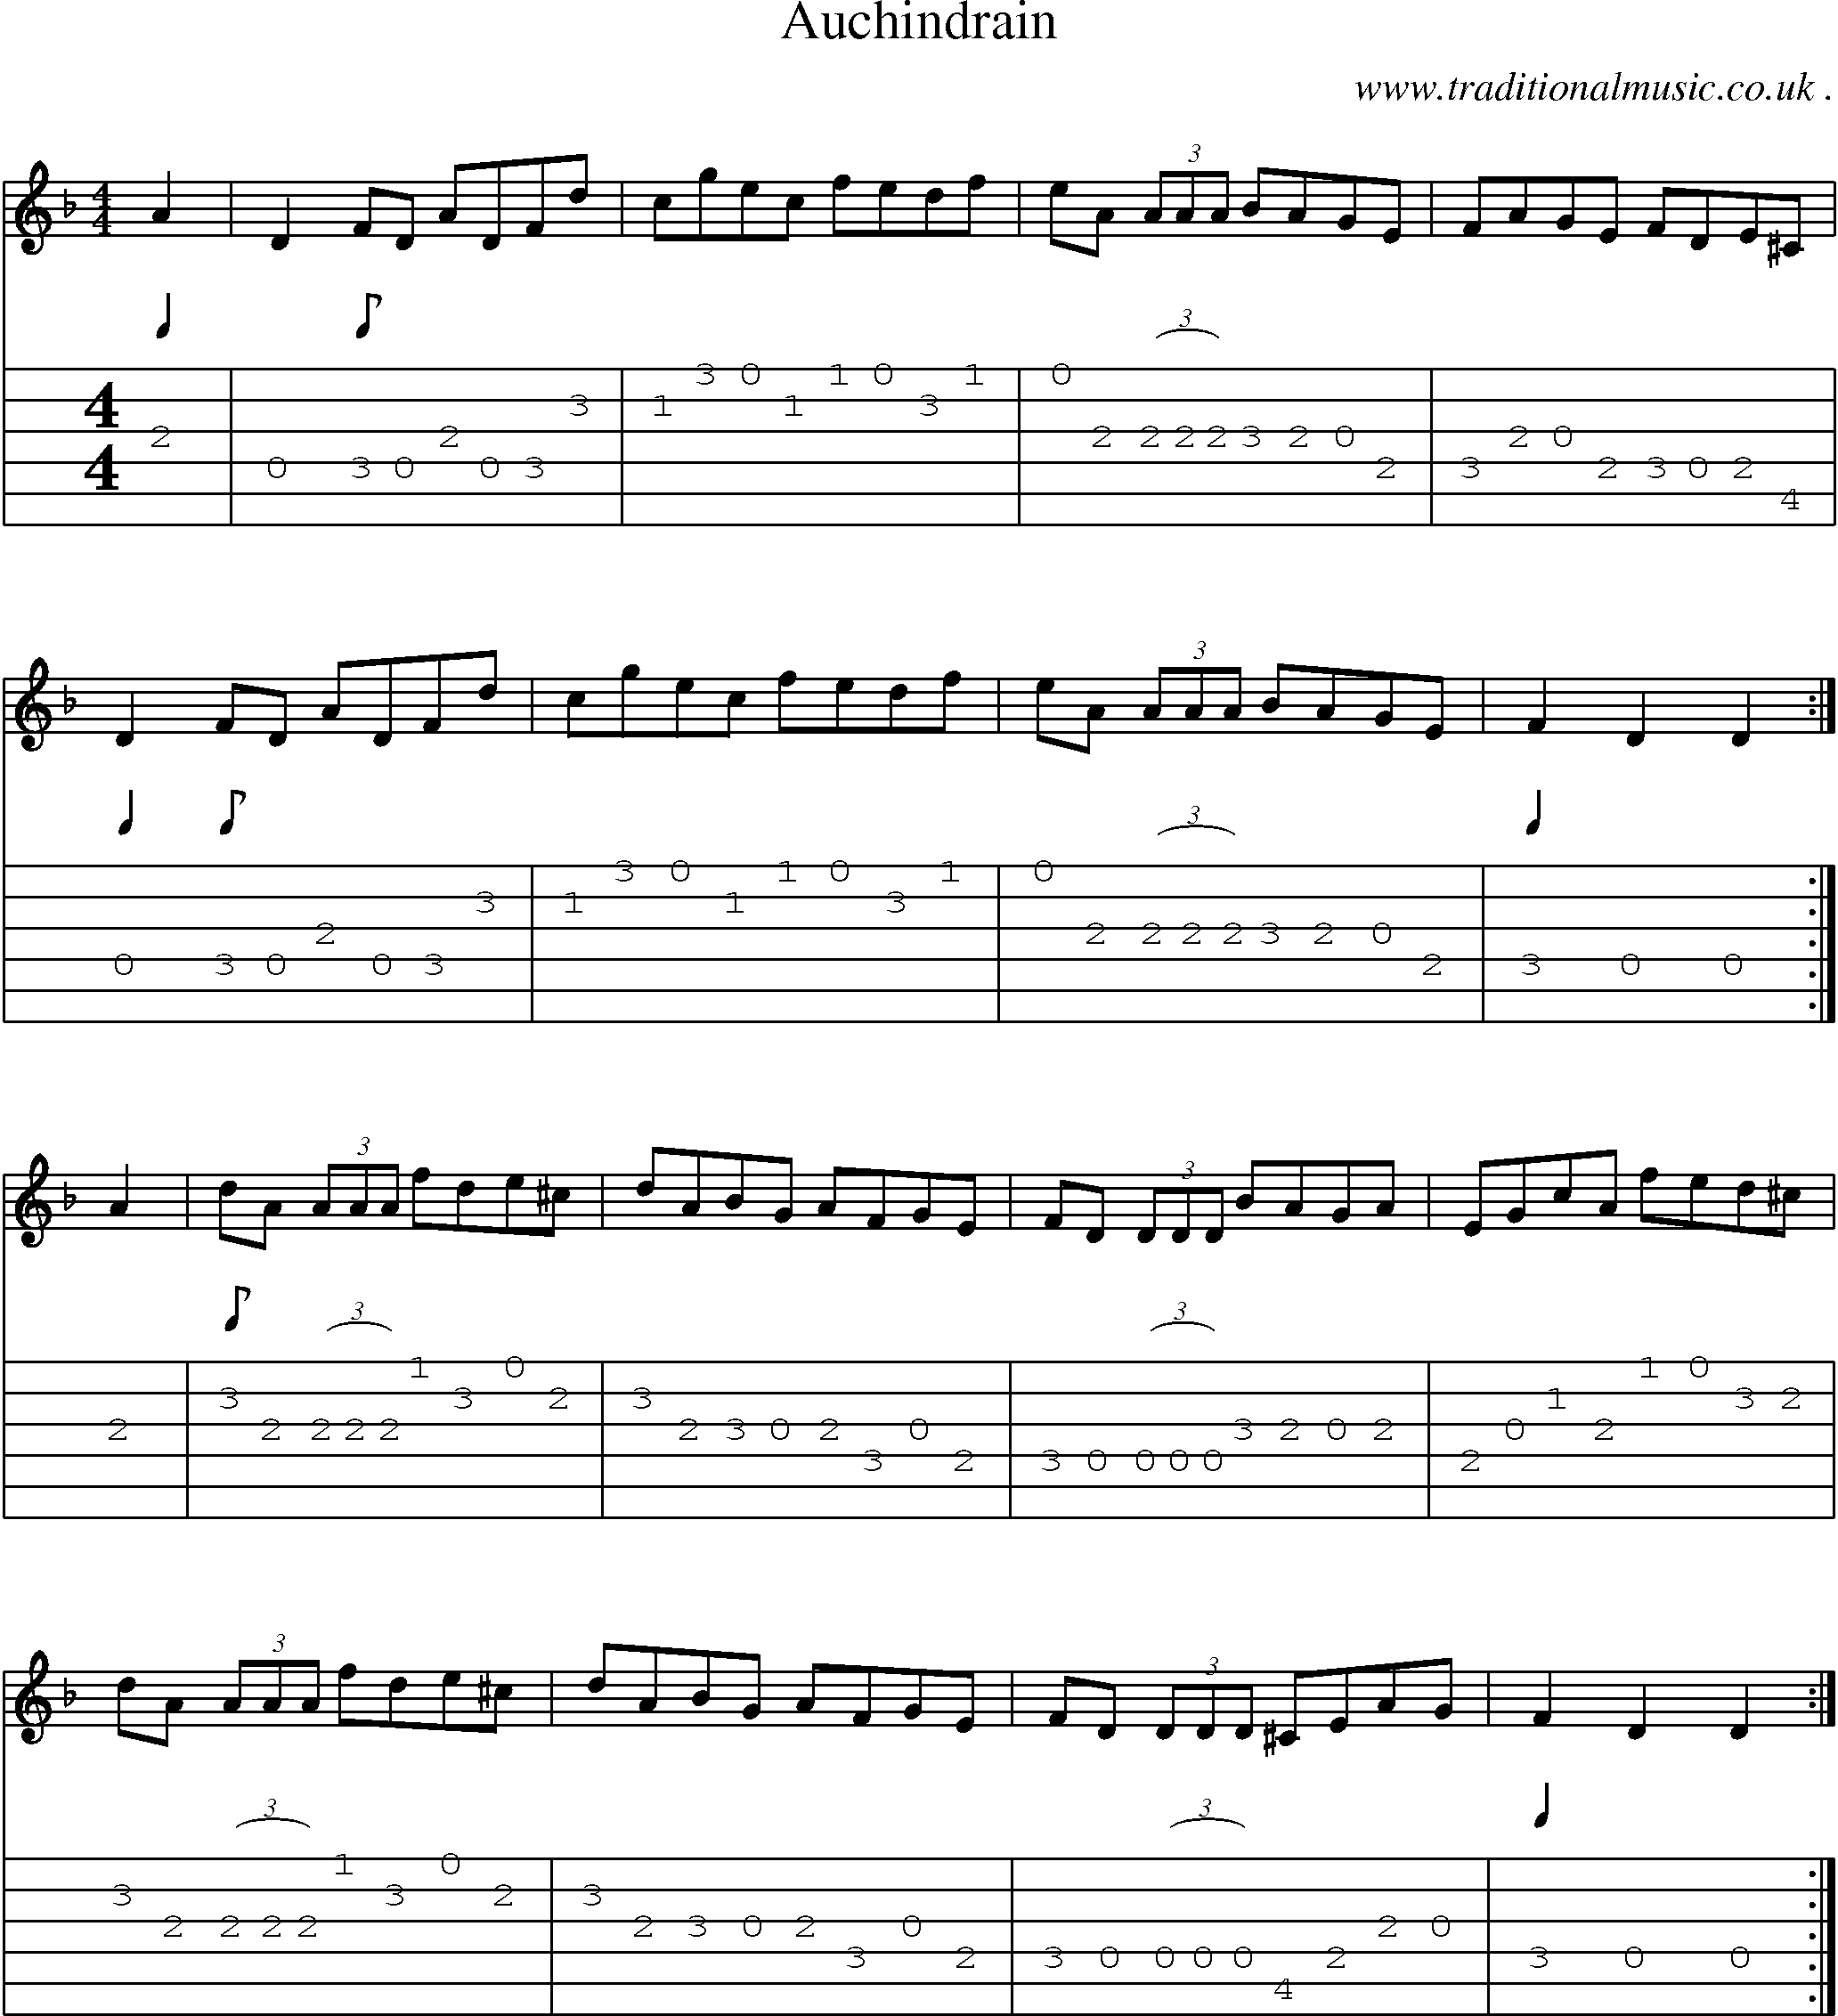 Sheet-music  score, Chords and Guitar Tabs for Auchindrain